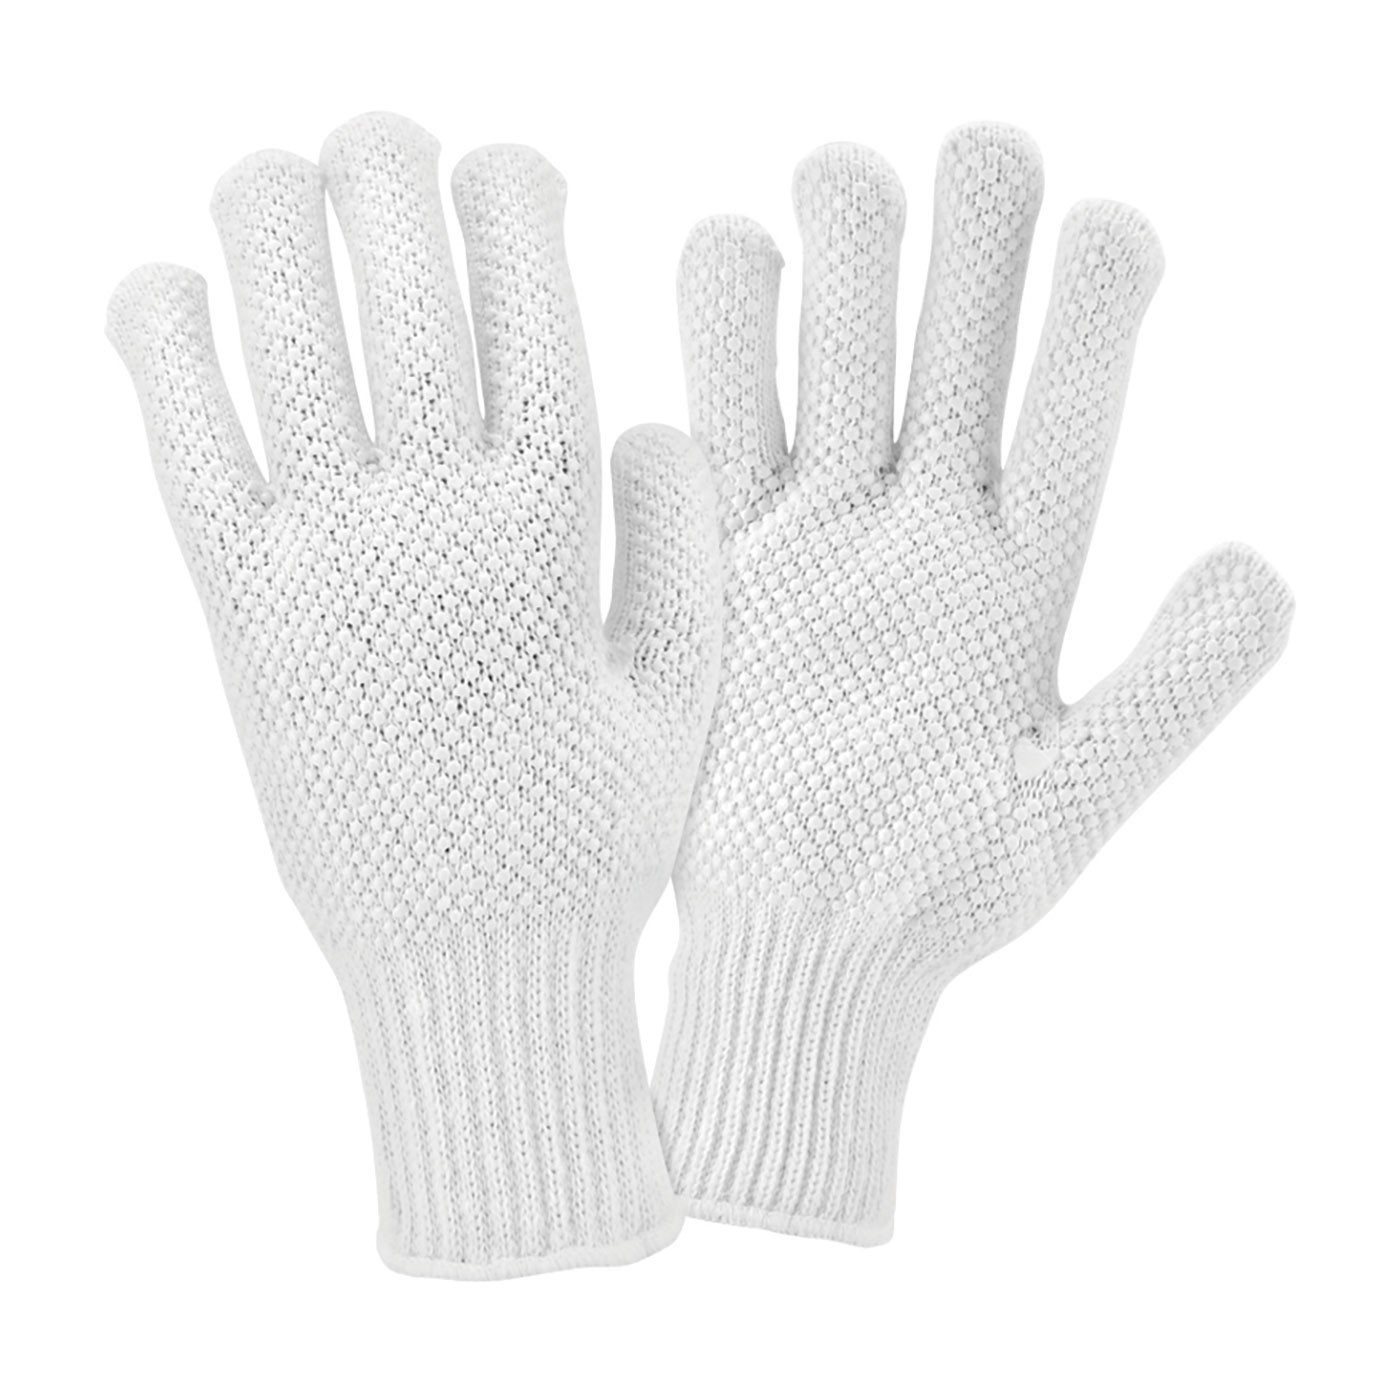 PIP® Seamless Knit Cotton / Polyester Glove with Double-Sided PVC Dot Grip  (#K708SKBSW)